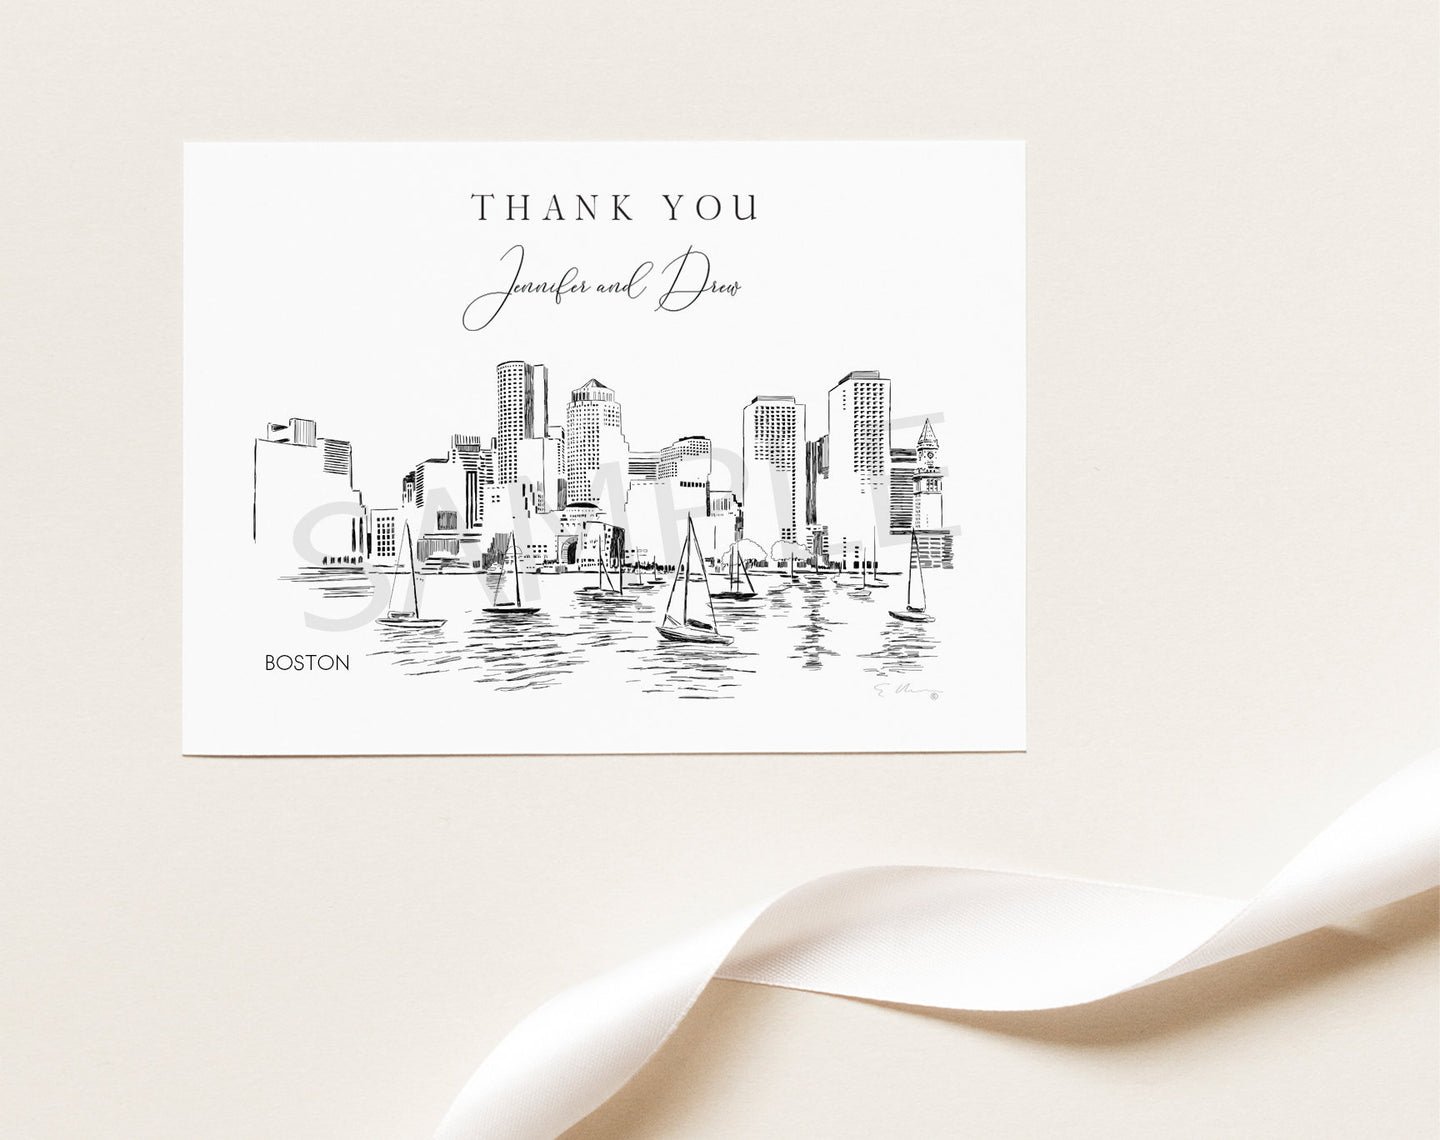 Boston Skyline Thank You Cards, Personal Note Cards, Bridal Shower, Real Estate Agent, Corporate Thank you Cards (set of 25 cards)